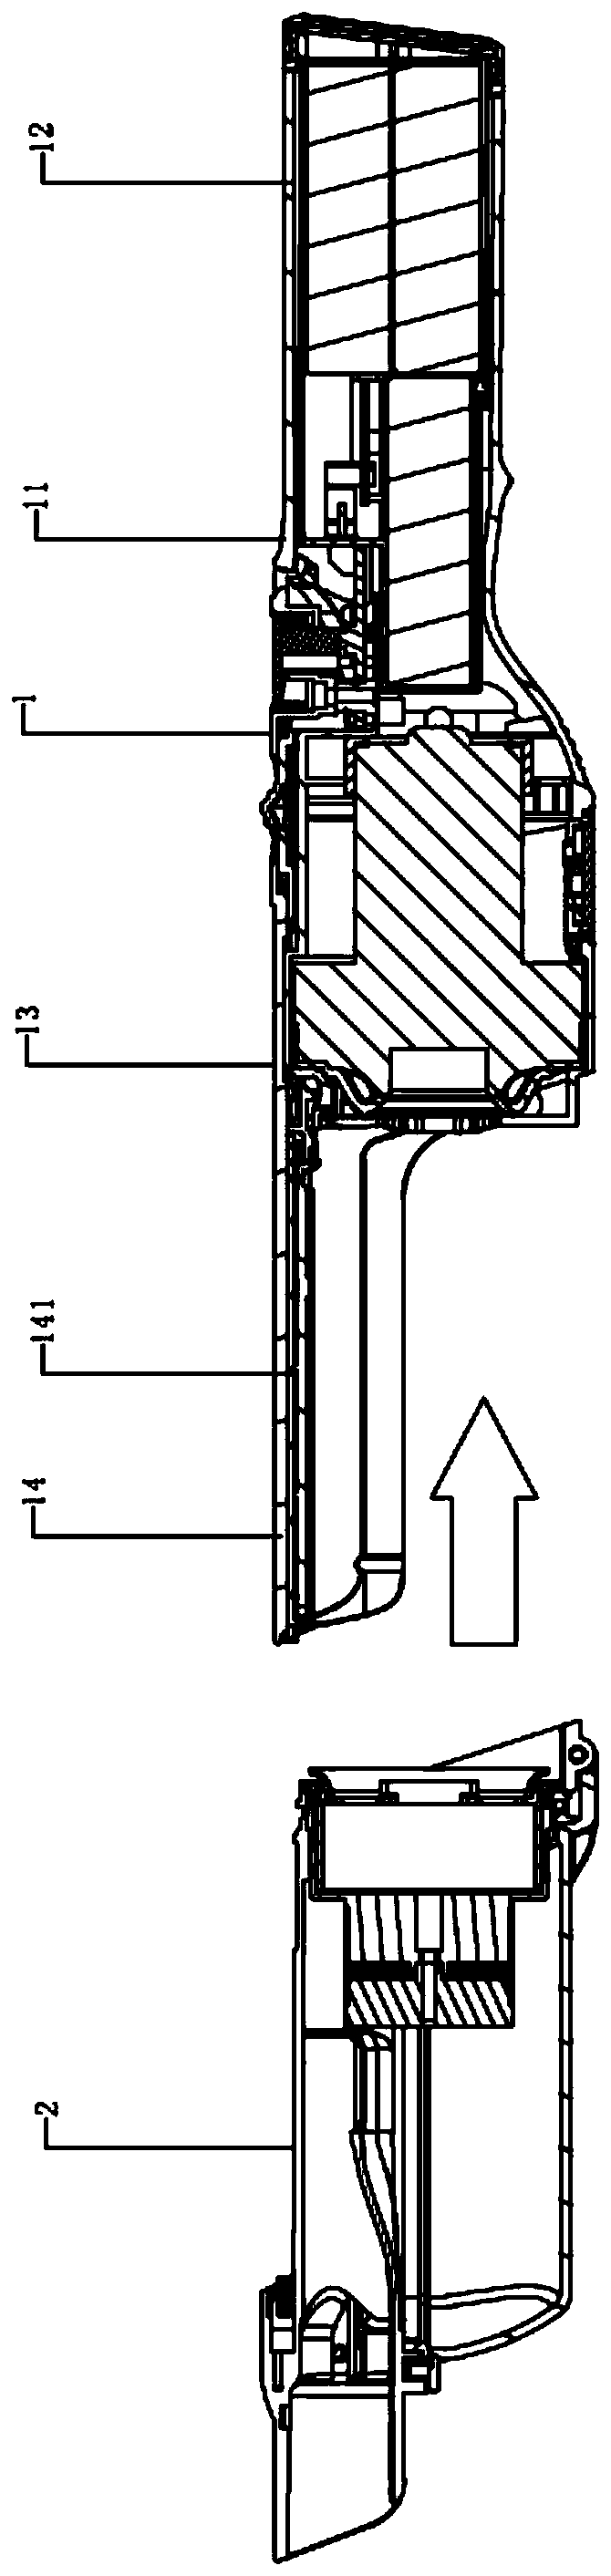 Handheld dust collector separation method for separating dust cup assembly by one key